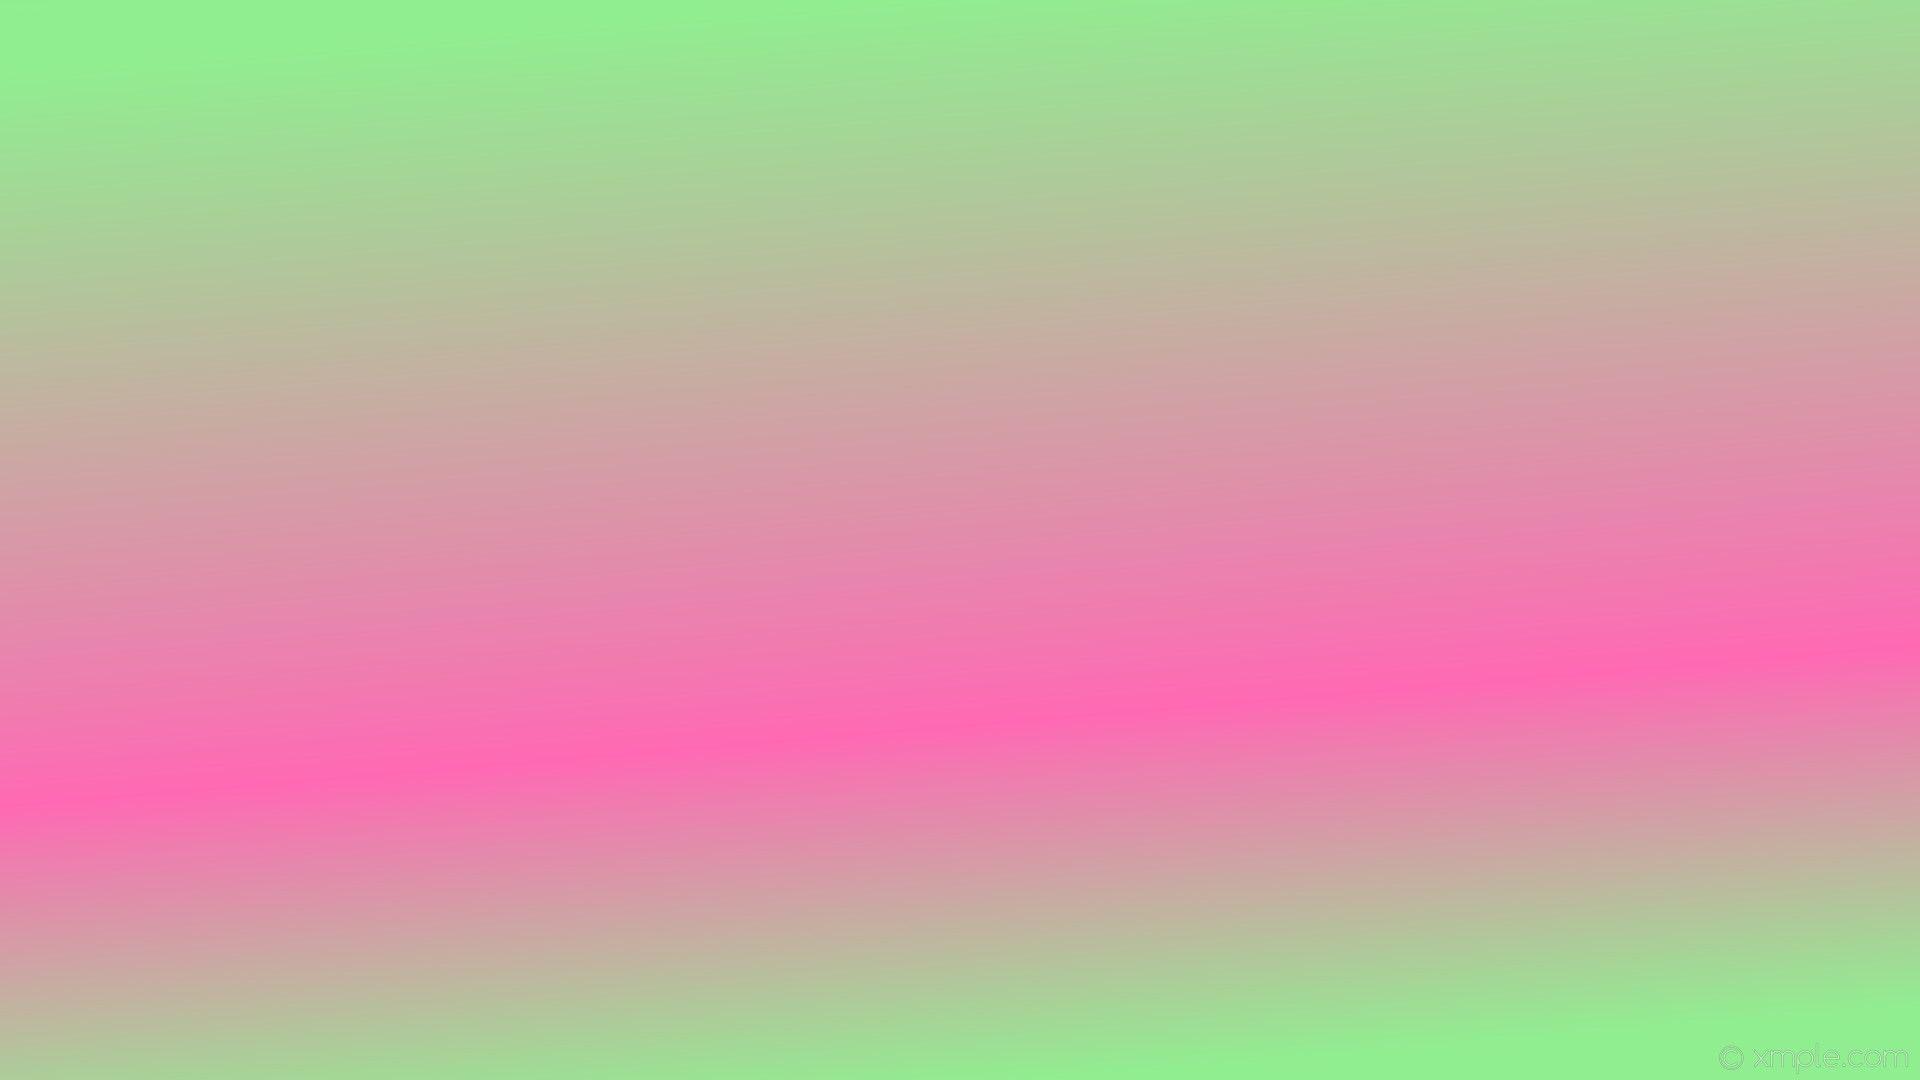 🔥 130+ Pink and Green Wallpaper Aesthetic 4k iphone pc New HD